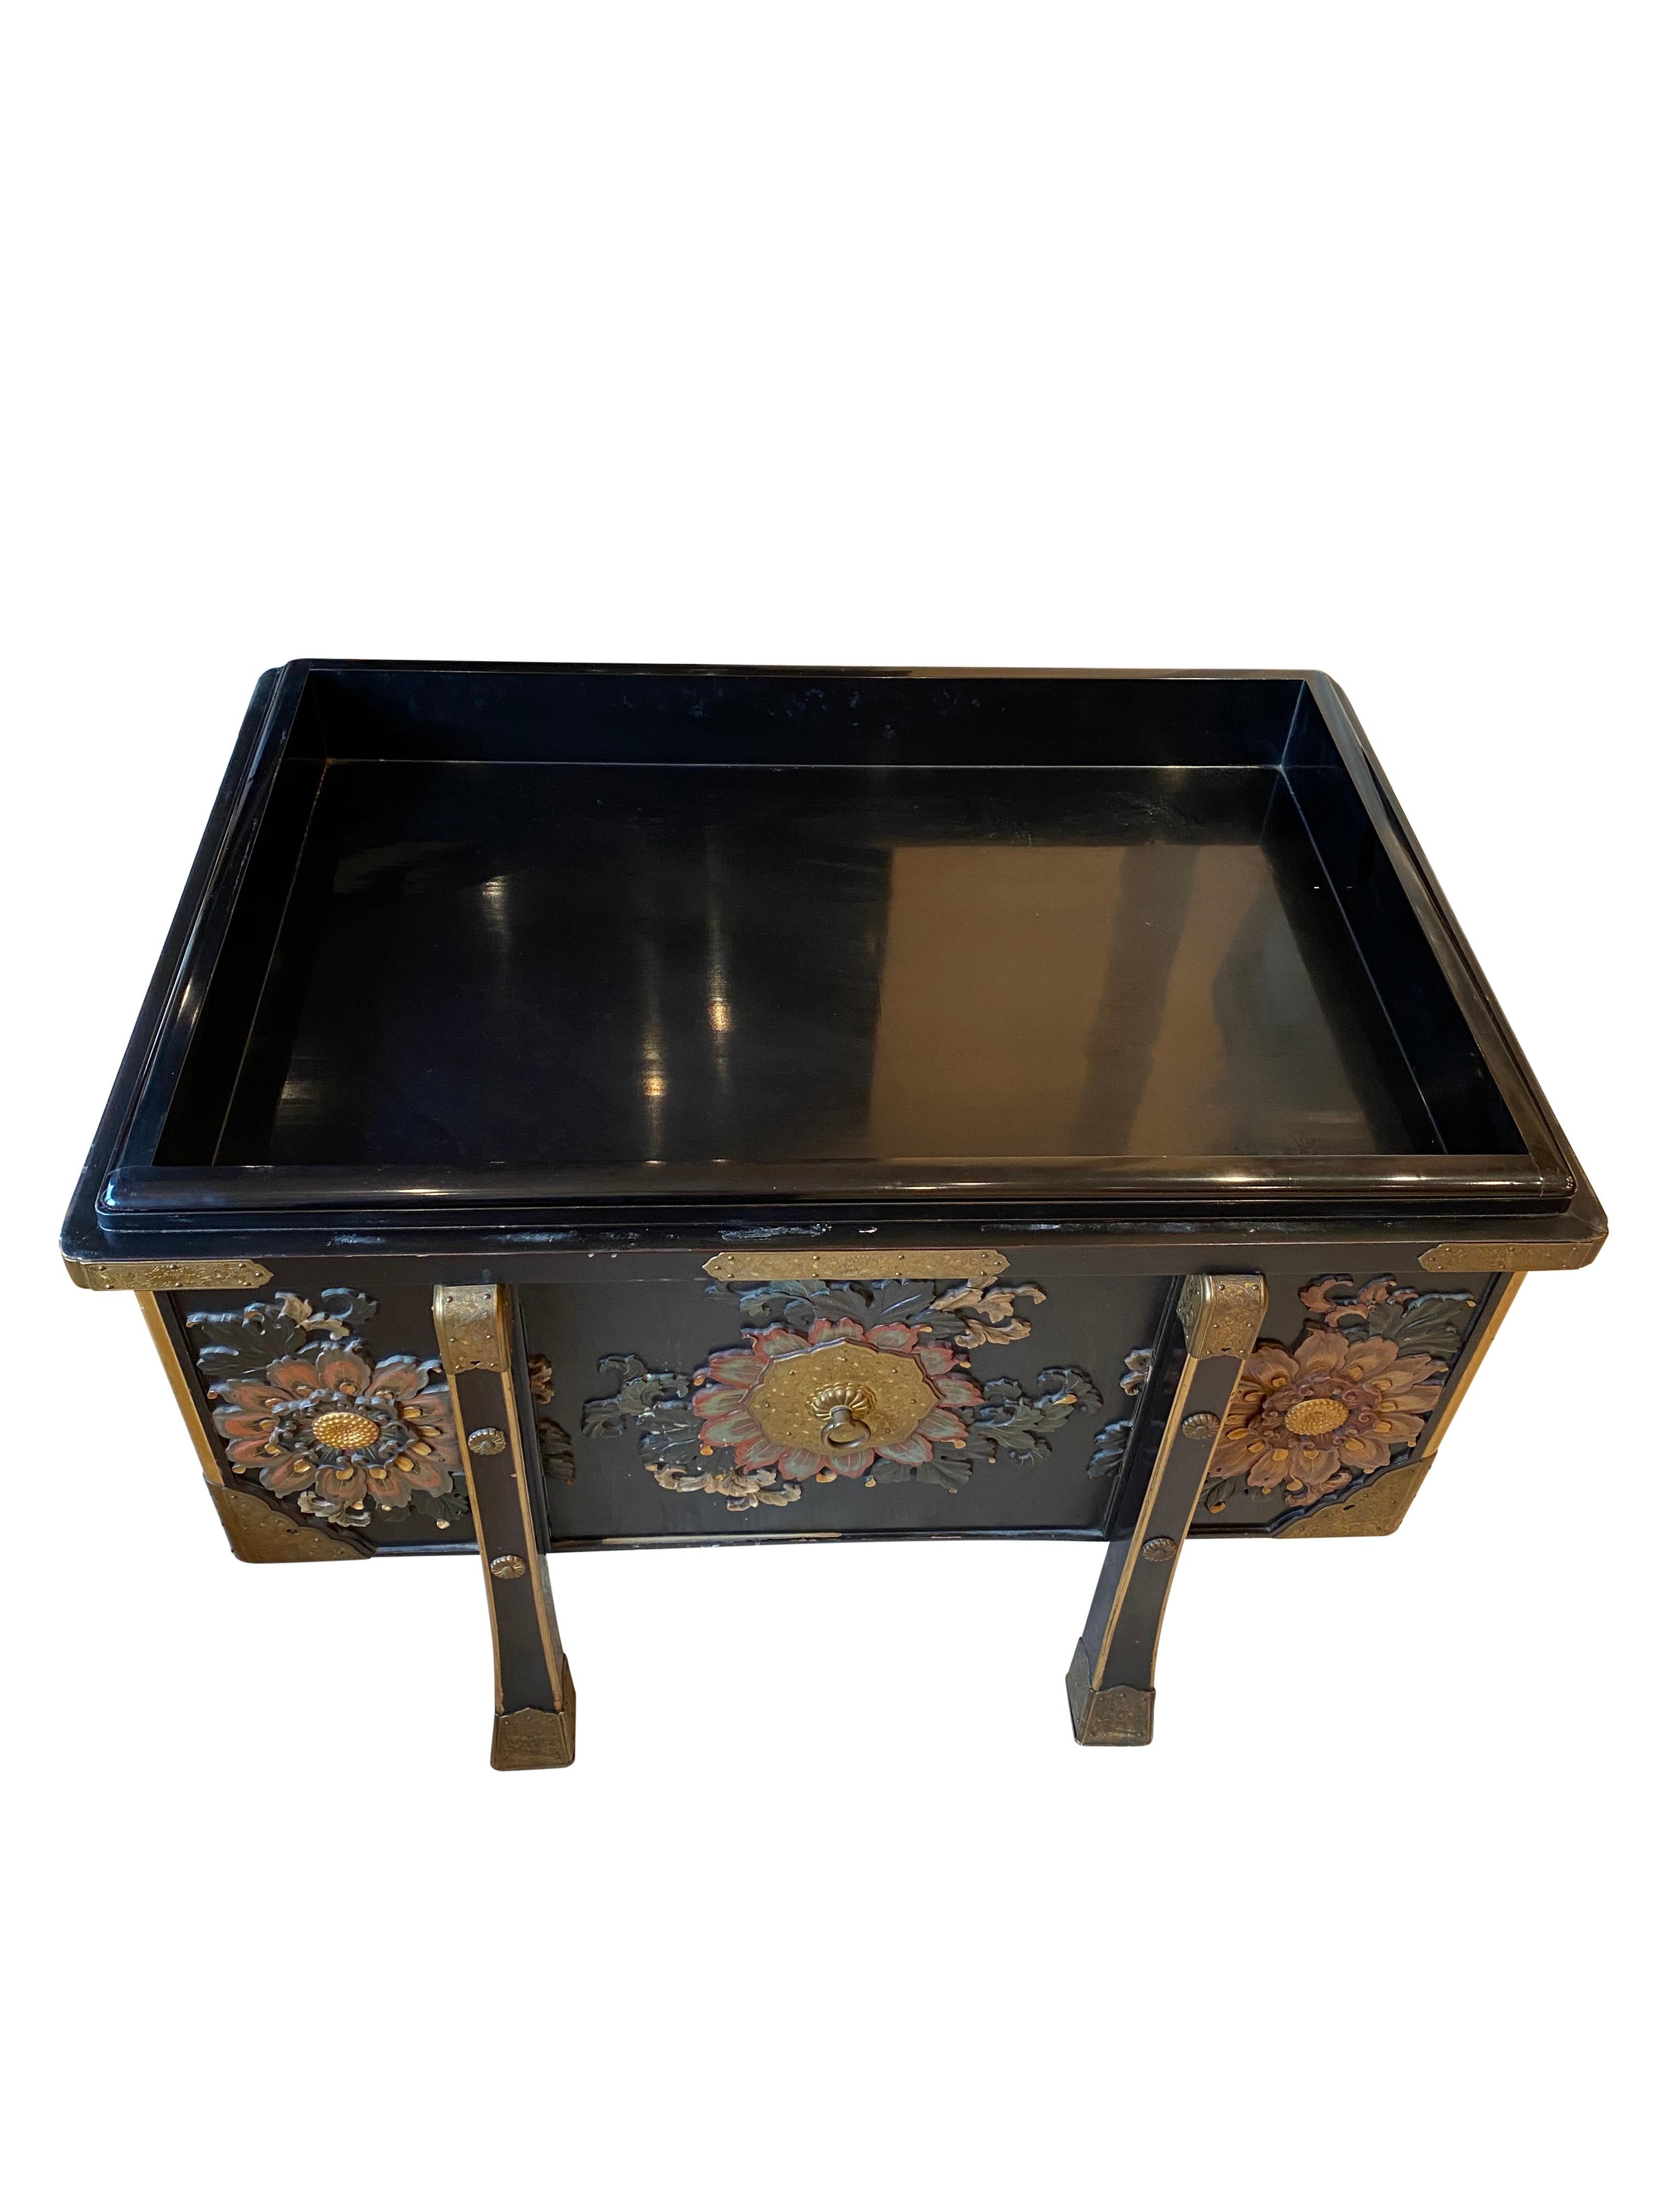 Large Japanese Black Lacquered Storage Chest, 19th Century For Sale 10